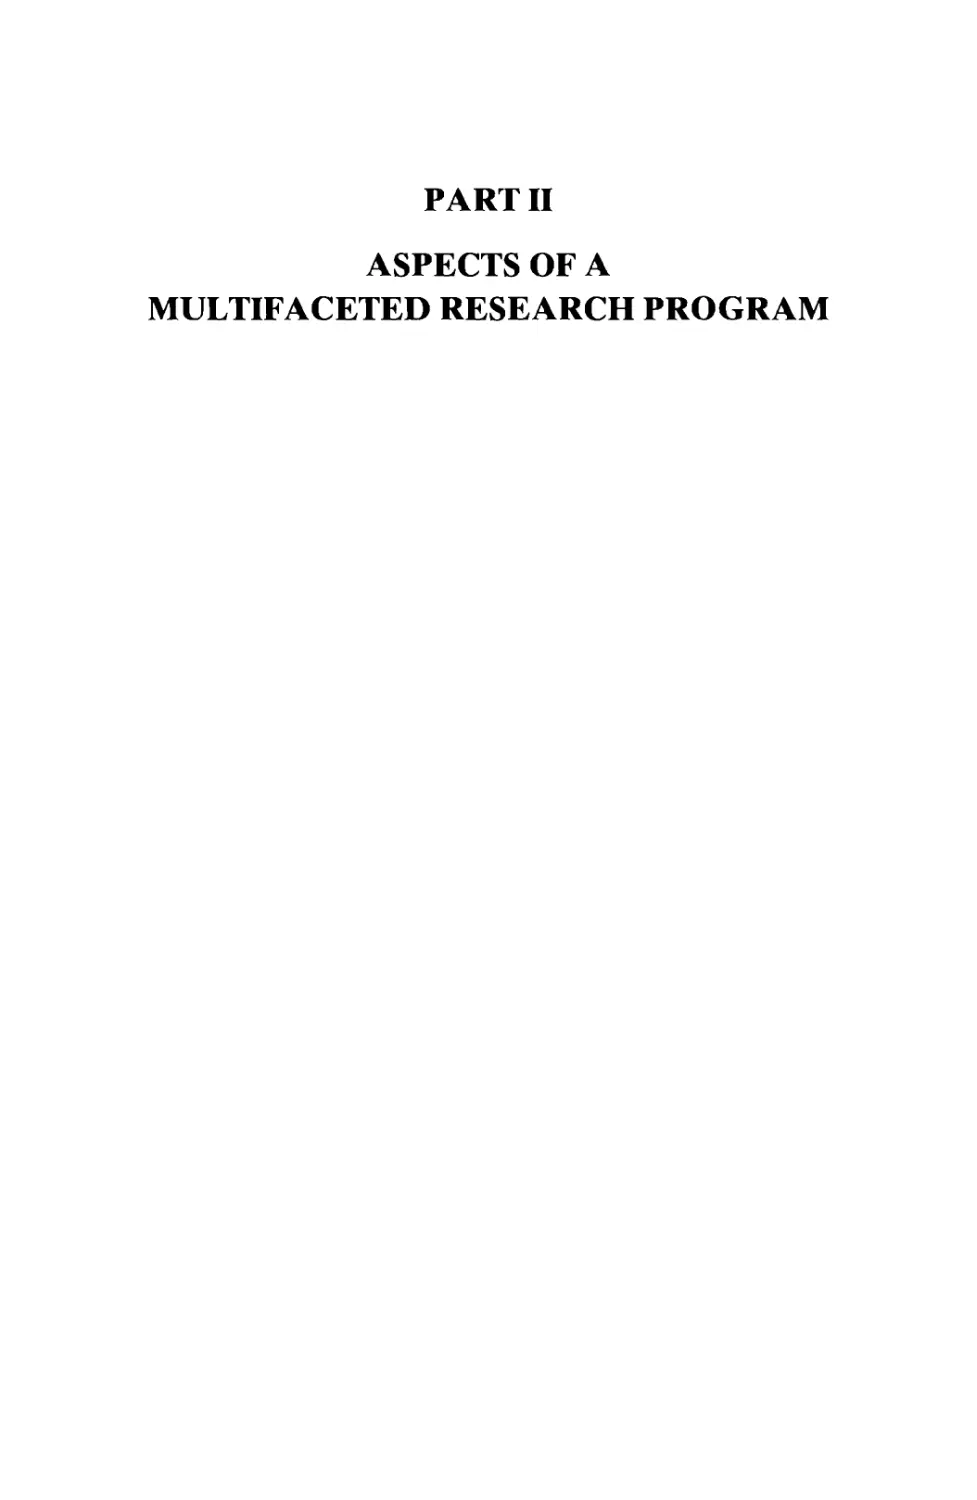 PART II. ASPECTS OF A MULTIFACETED RESEARCH PROGRAM